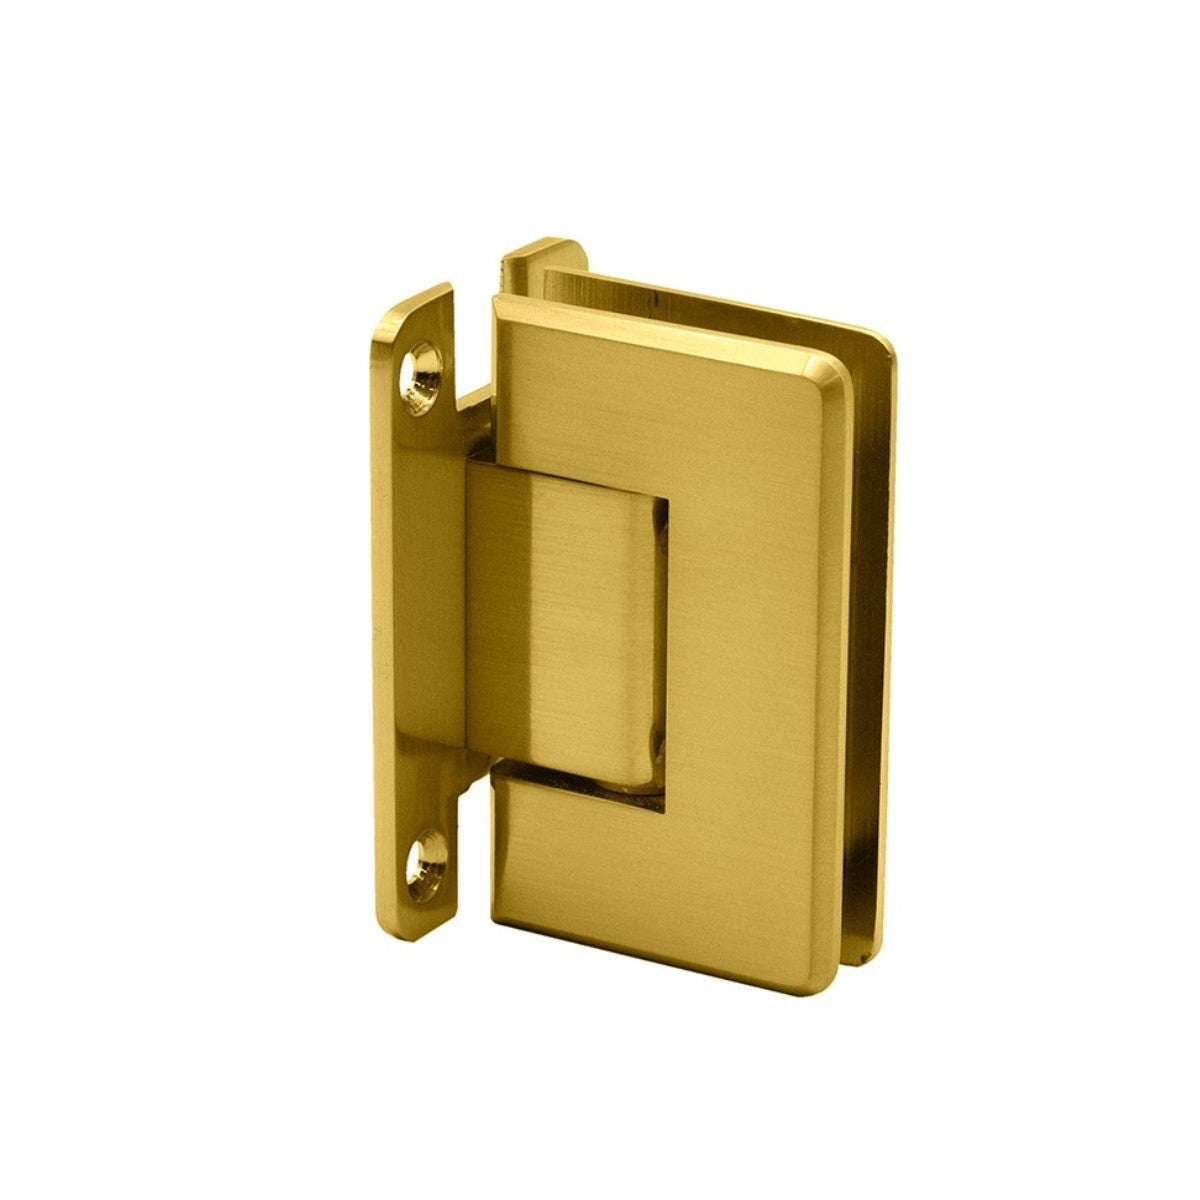 Wall to Glass "H" Back Plate Hinge- Beveled